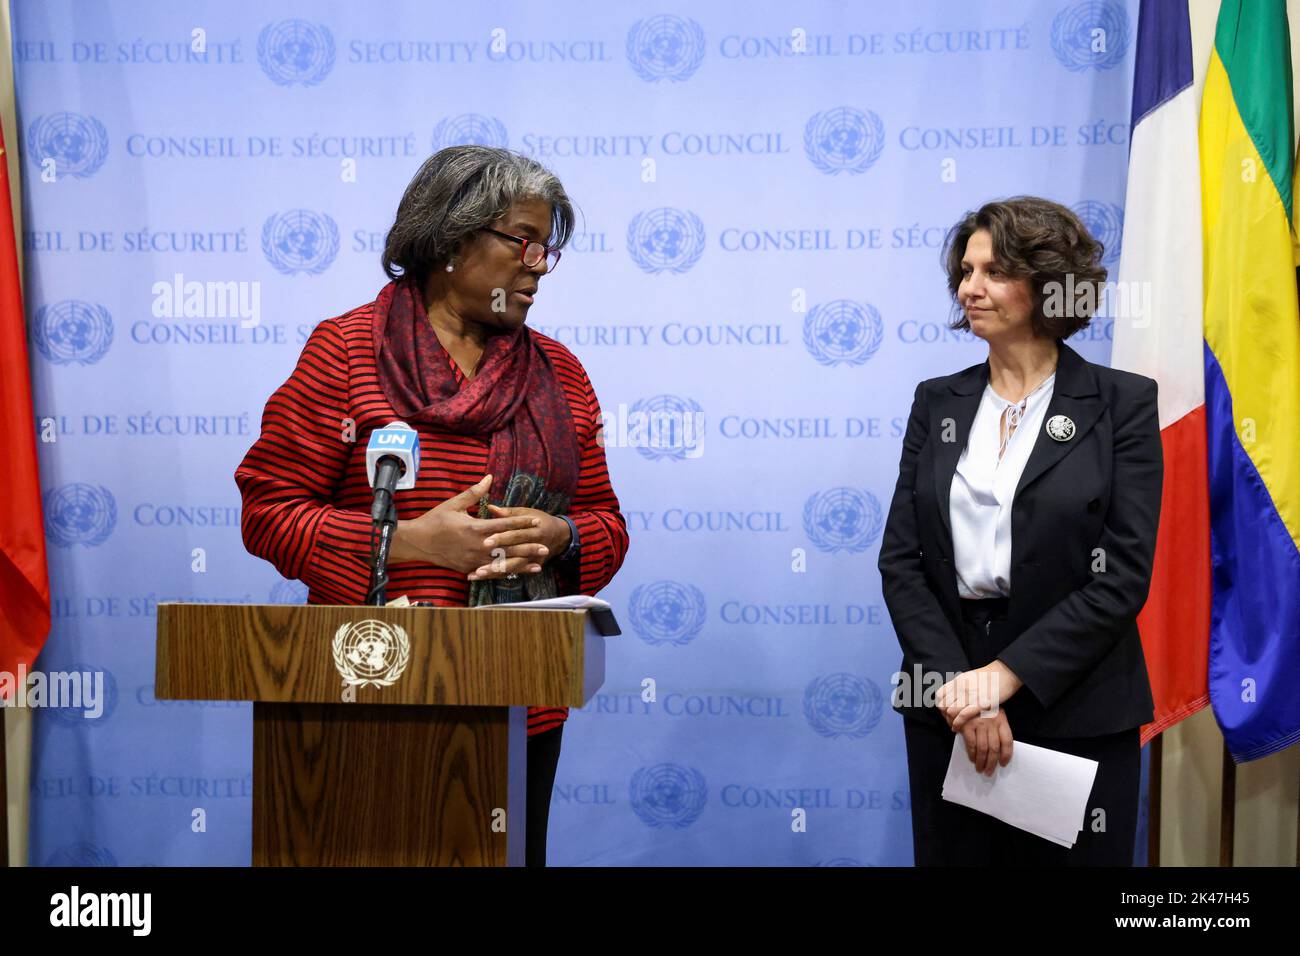 U.S. Ambassador to the United Nations Linda Thomas-Greenfield speaks to the media as she stands next to Deputy Permanent Representative of Albania to the U.N. Albana Dautllari, following a meeting of the U.N. Security Council at the request of Russia to discuss damage to two Russian gas pipelines to Europe, in New York, U.S., September 30, 2022. REUTERS/Andrew Kelly Stock Photo